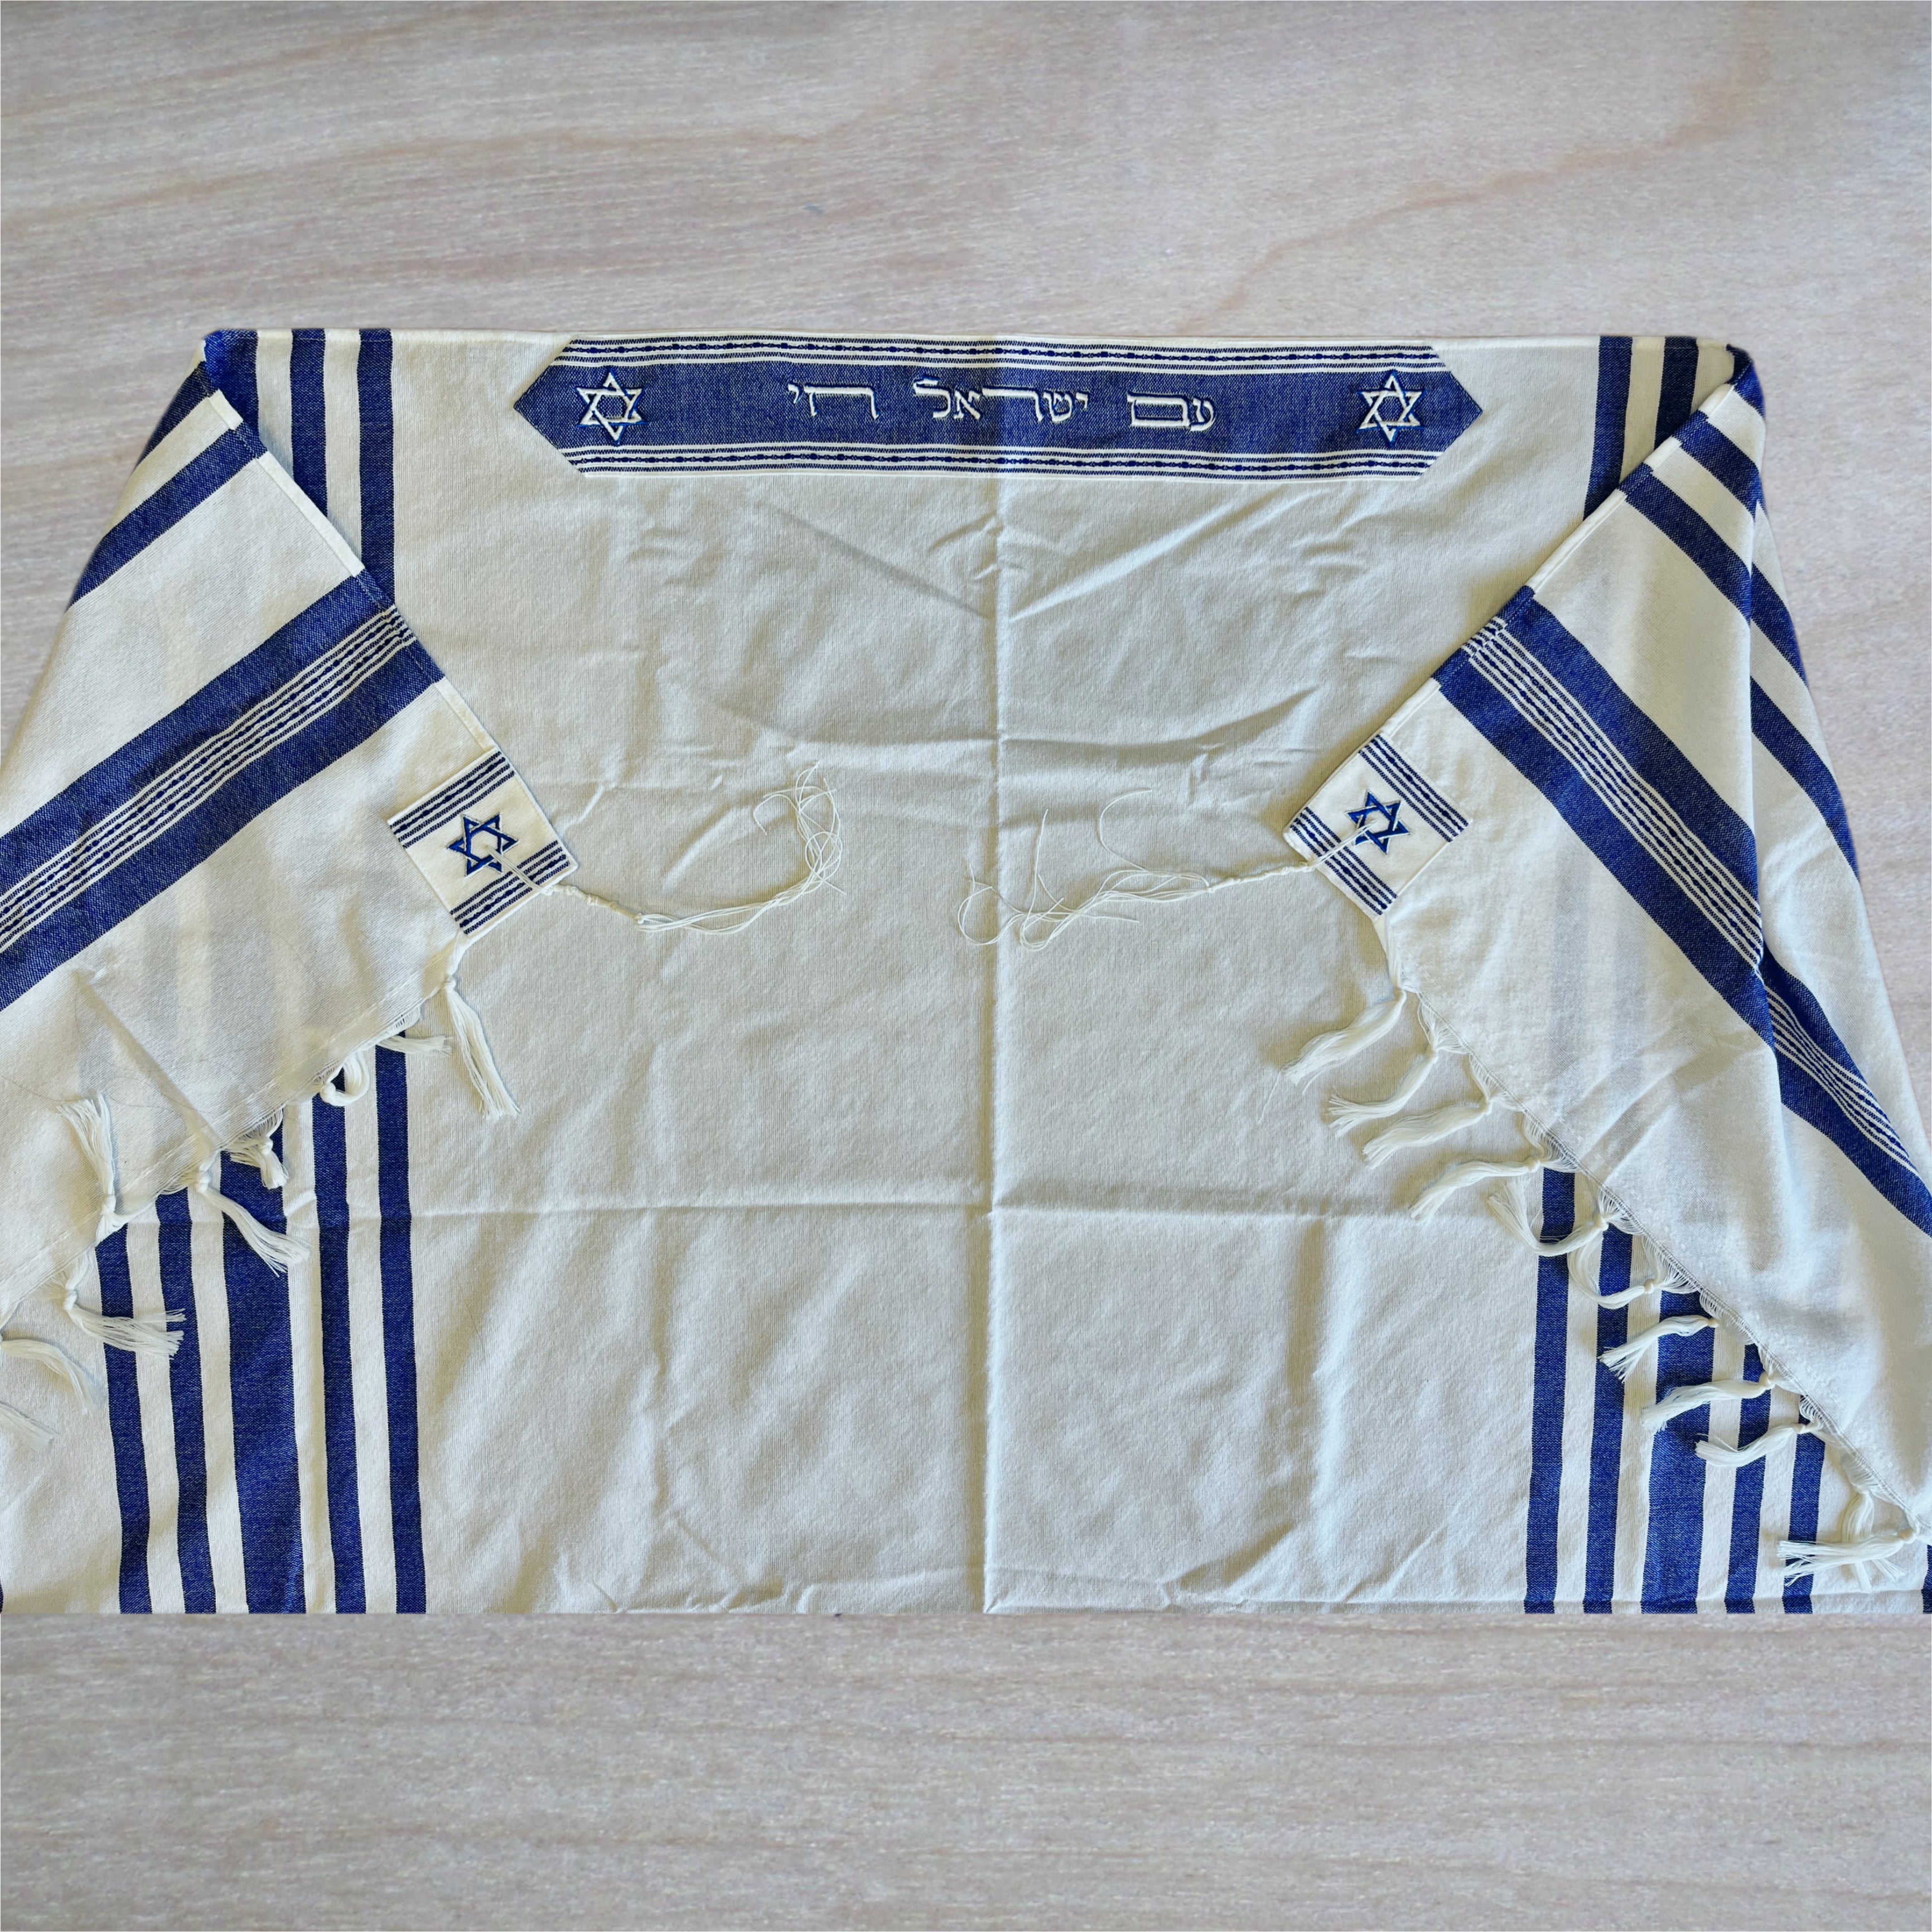 Special Edition “Am Israel Chai” Wool Tallit - blue on white